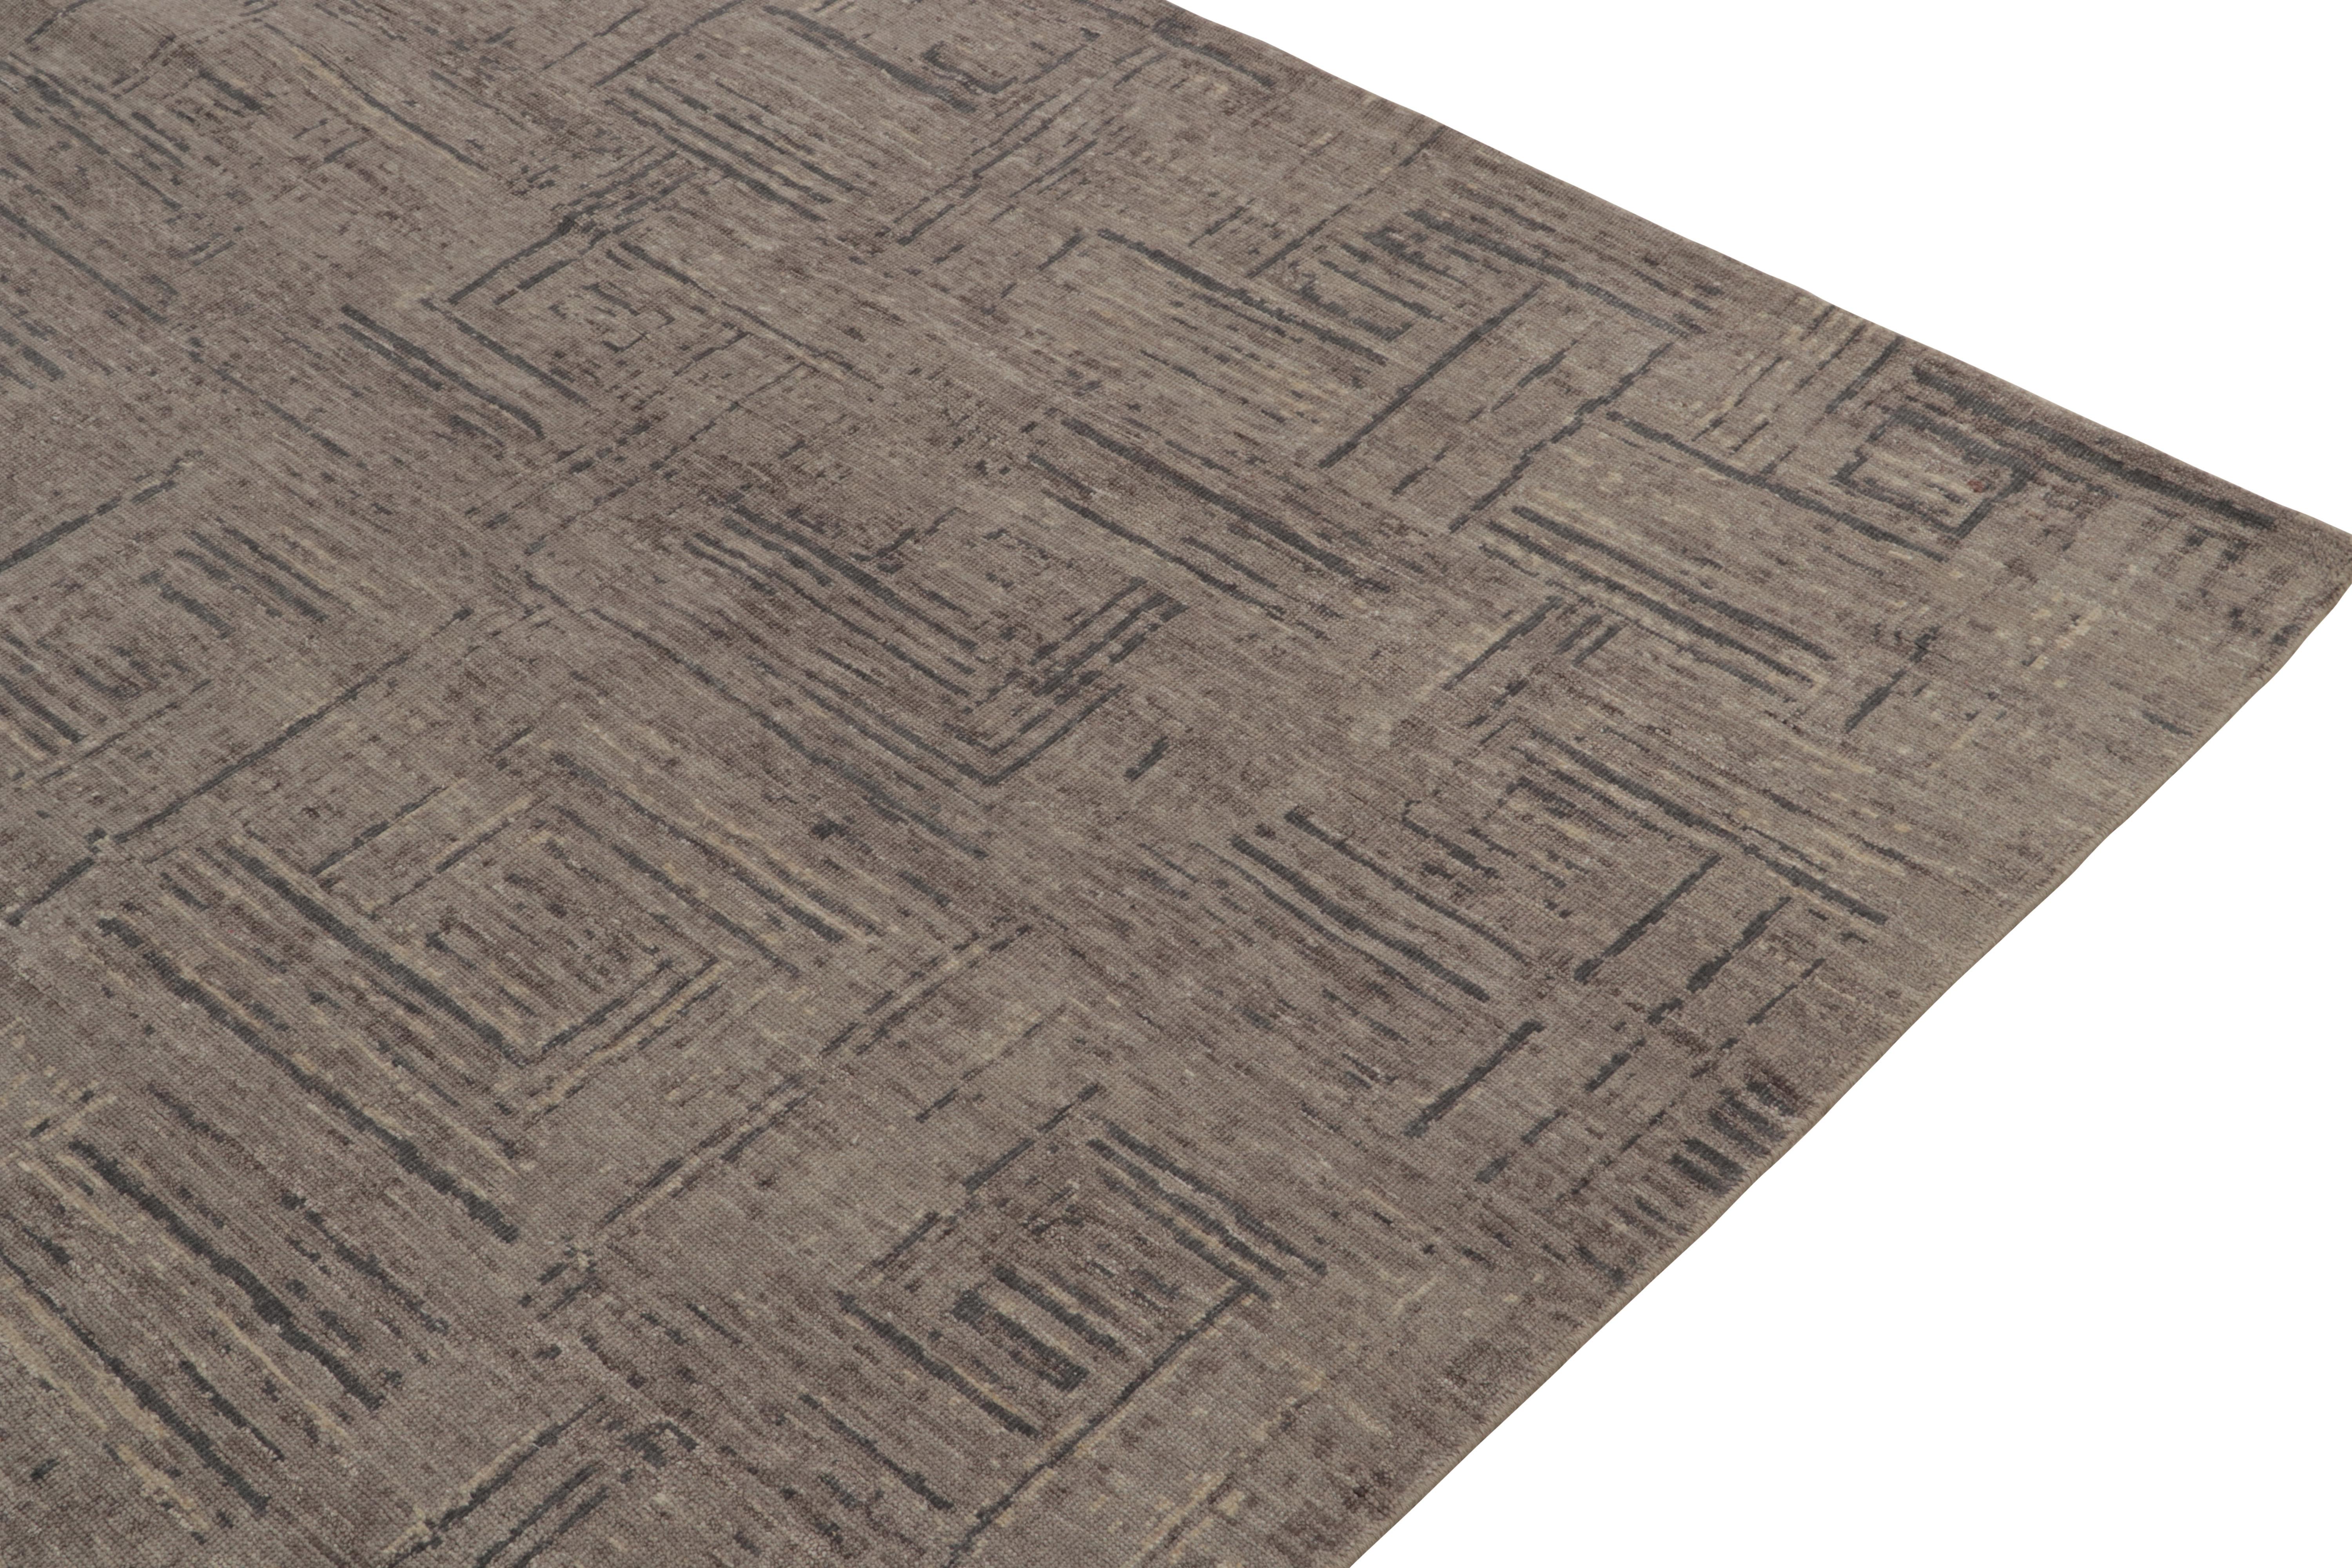 Contemporary Rug & Kilim's Hand-Knotted Abstract Rug in Grey, Beige-Brown Geometric Pattern For Sale